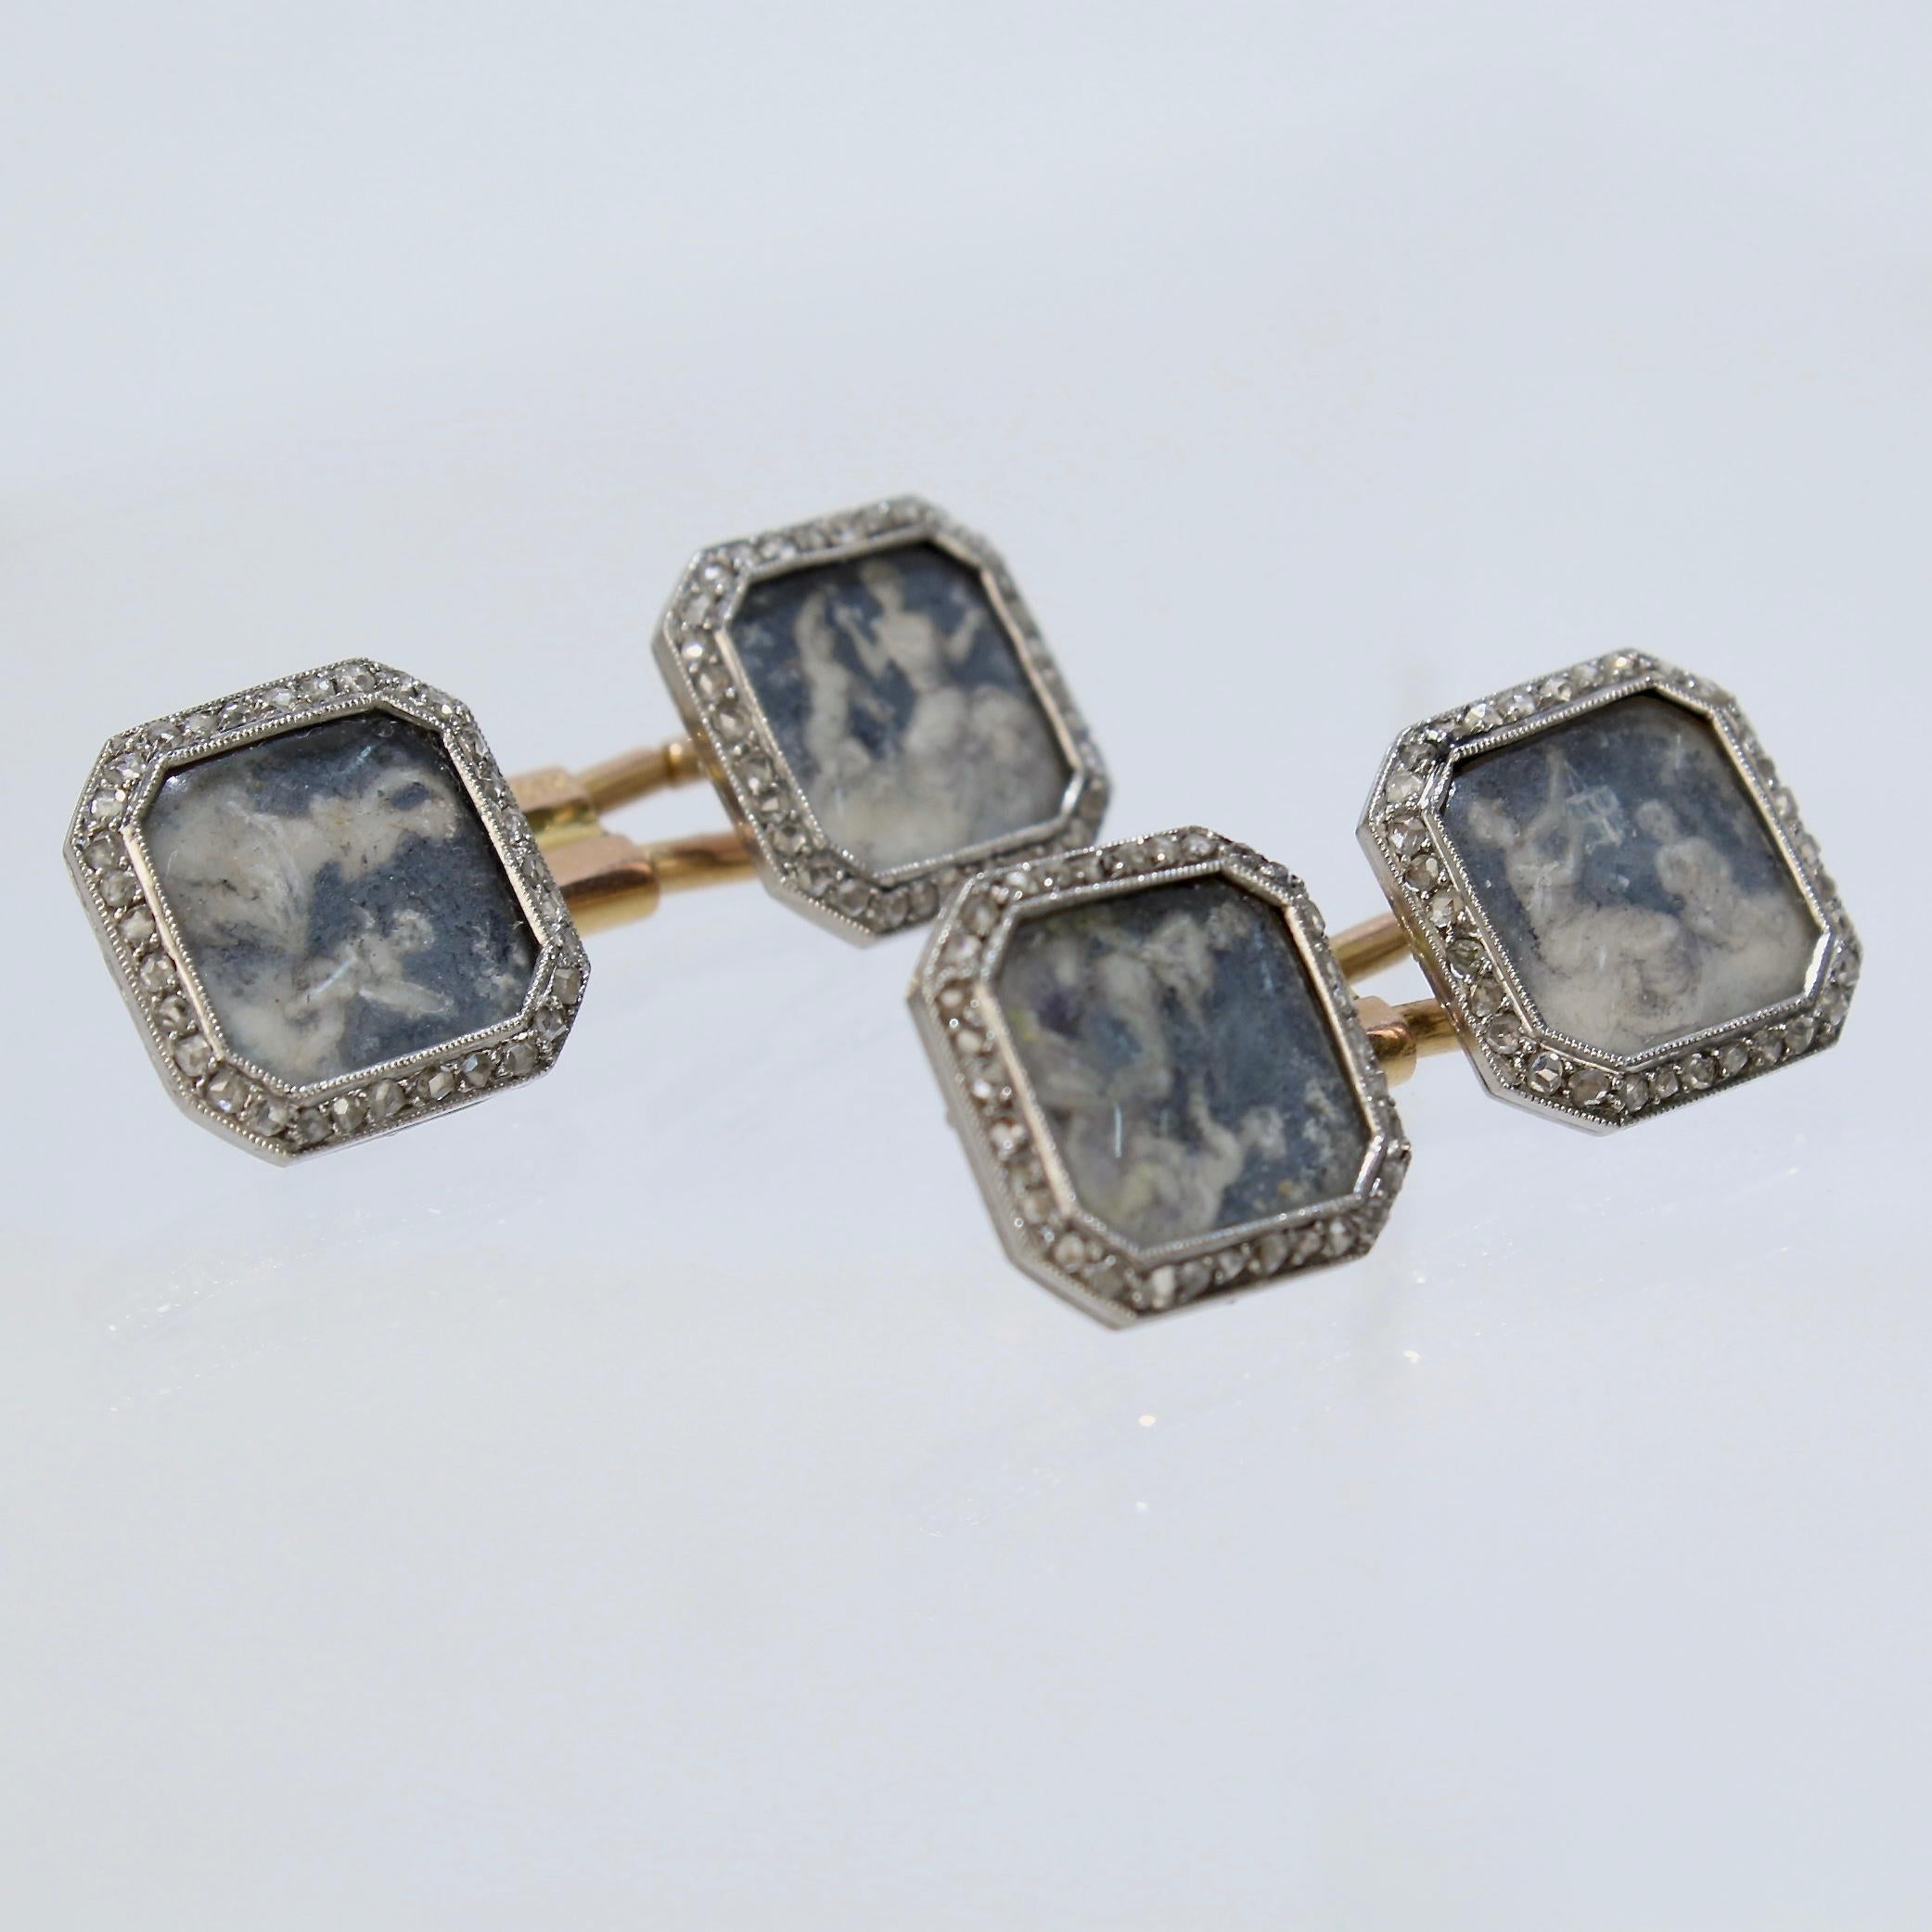 An extraordinarily rare pair of antique Boucheron cufflinks.

With diamond-set platinum frames encasing hand-painted classical scenes of a woman and a cherub under glass bezels. The scenes are possibly allegories of the Arts.

30 small diamonds